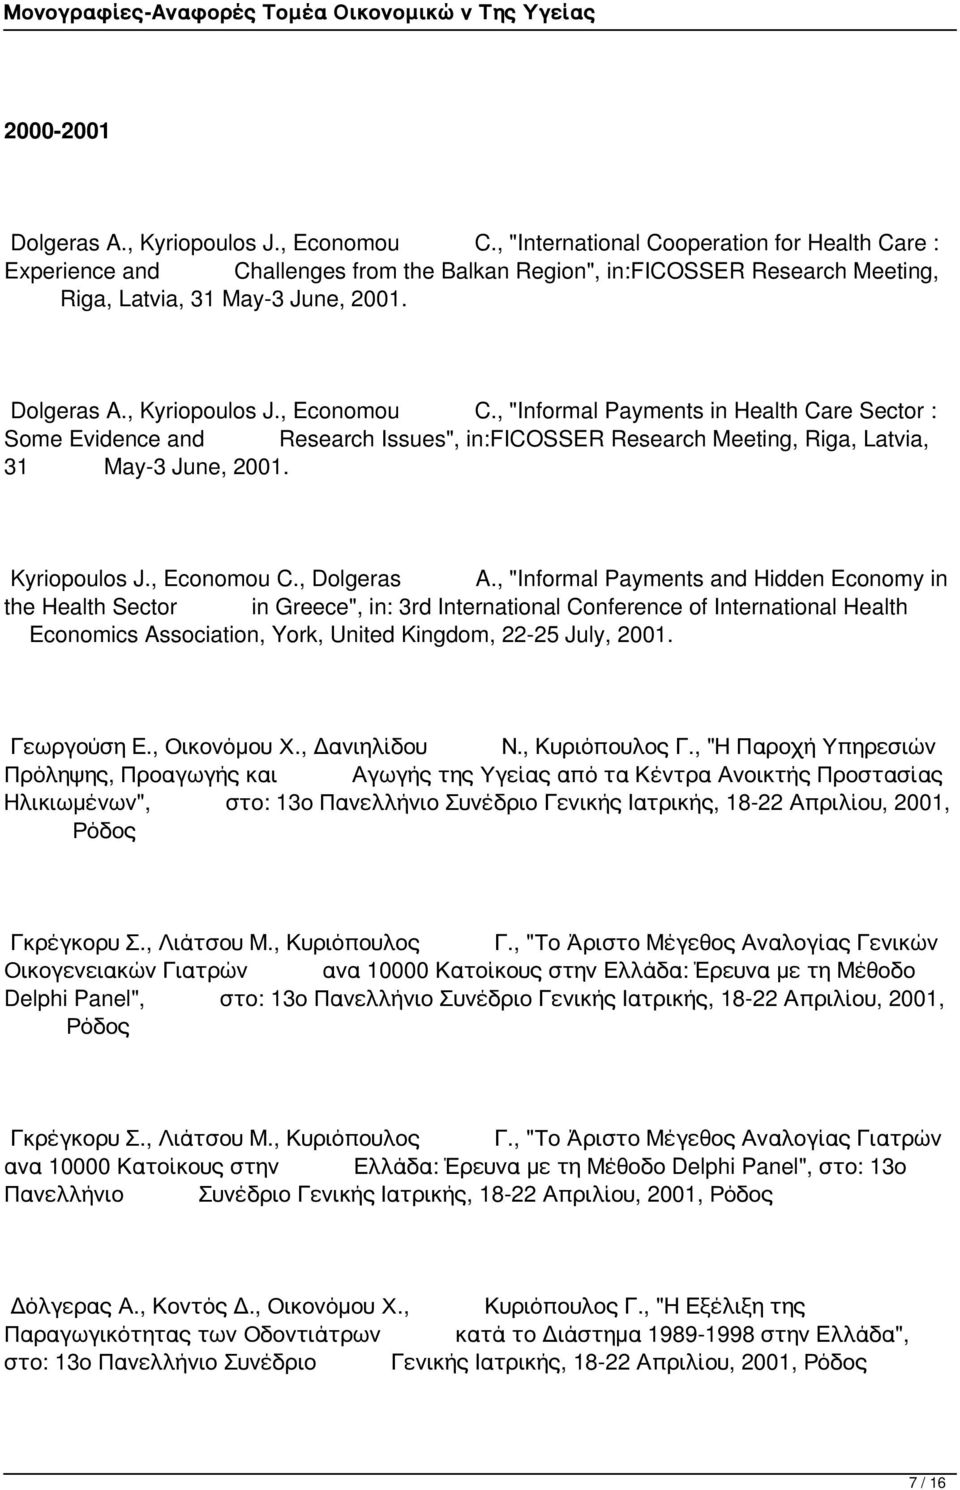 , Economou C., "Informal Payments in Health Care Sector : Some Evidence and Research Issues", in:ficosser Research Meeting, Riga, Latvia, 31 May-3 June, 2001. Kyriopoulos J., Economou C., Dolgeras A.